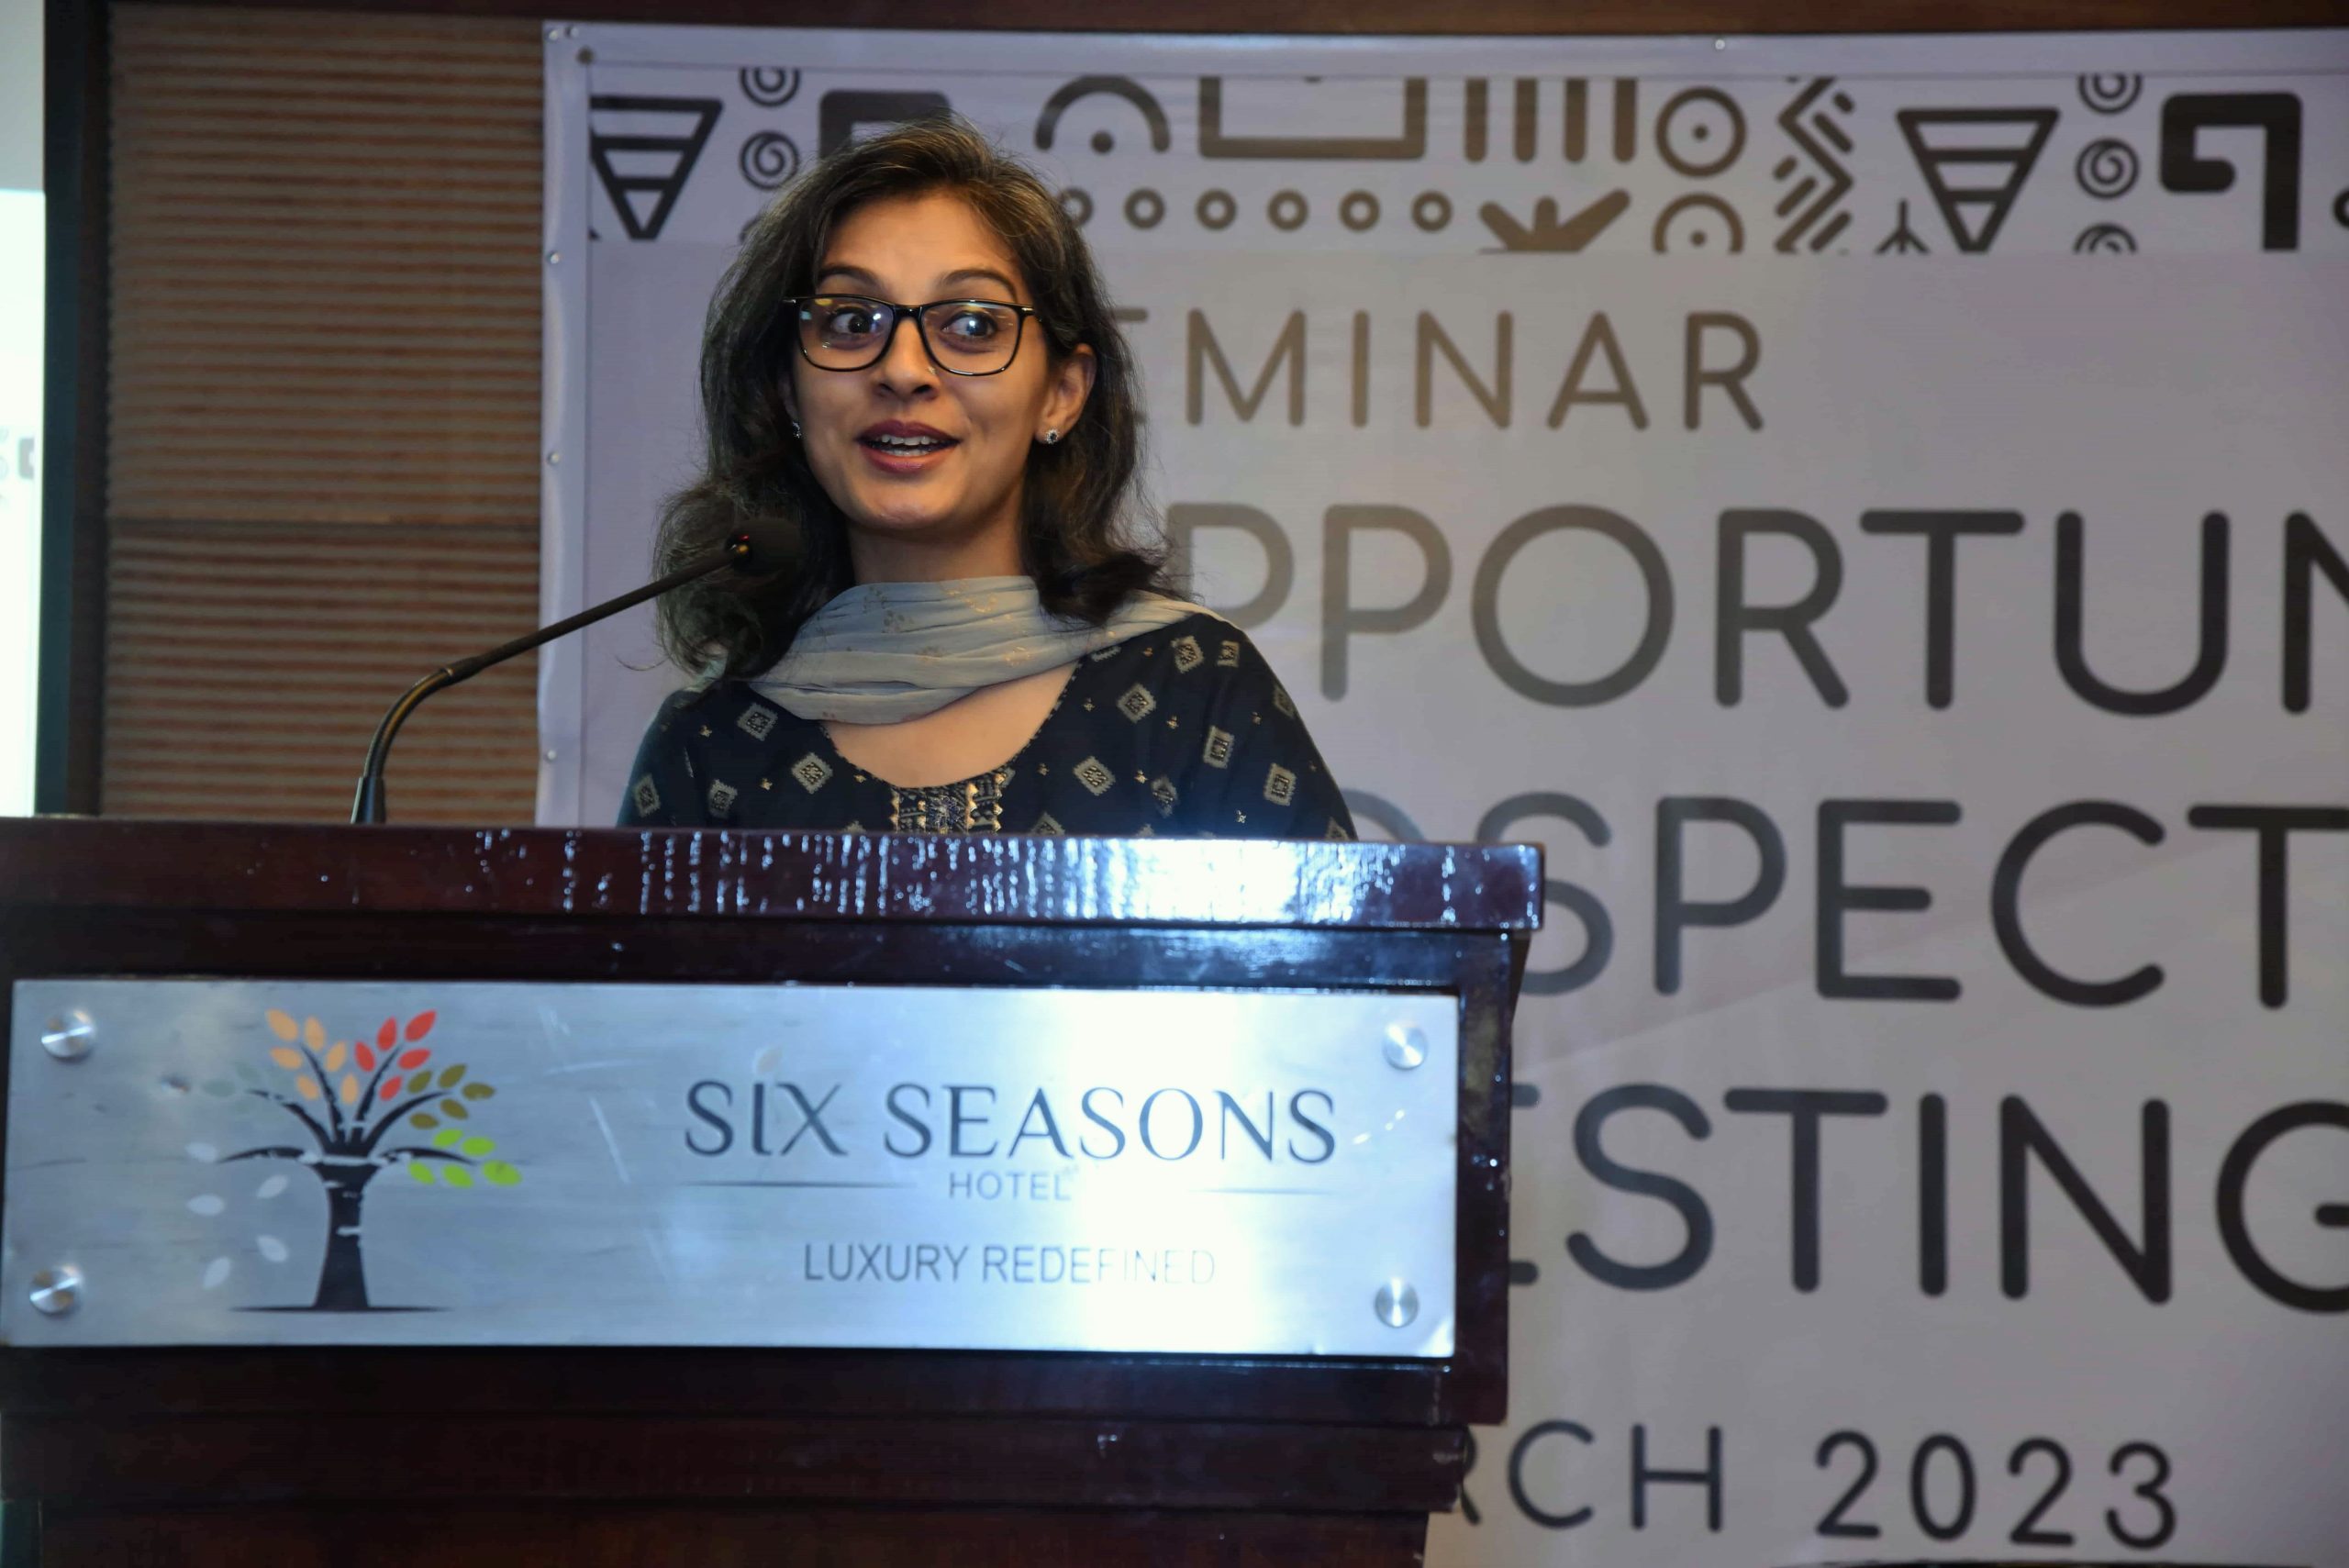 Sadia Haque, Founder & CEO at ShareTrip, sharing her perspectives on Gender Lens Investing